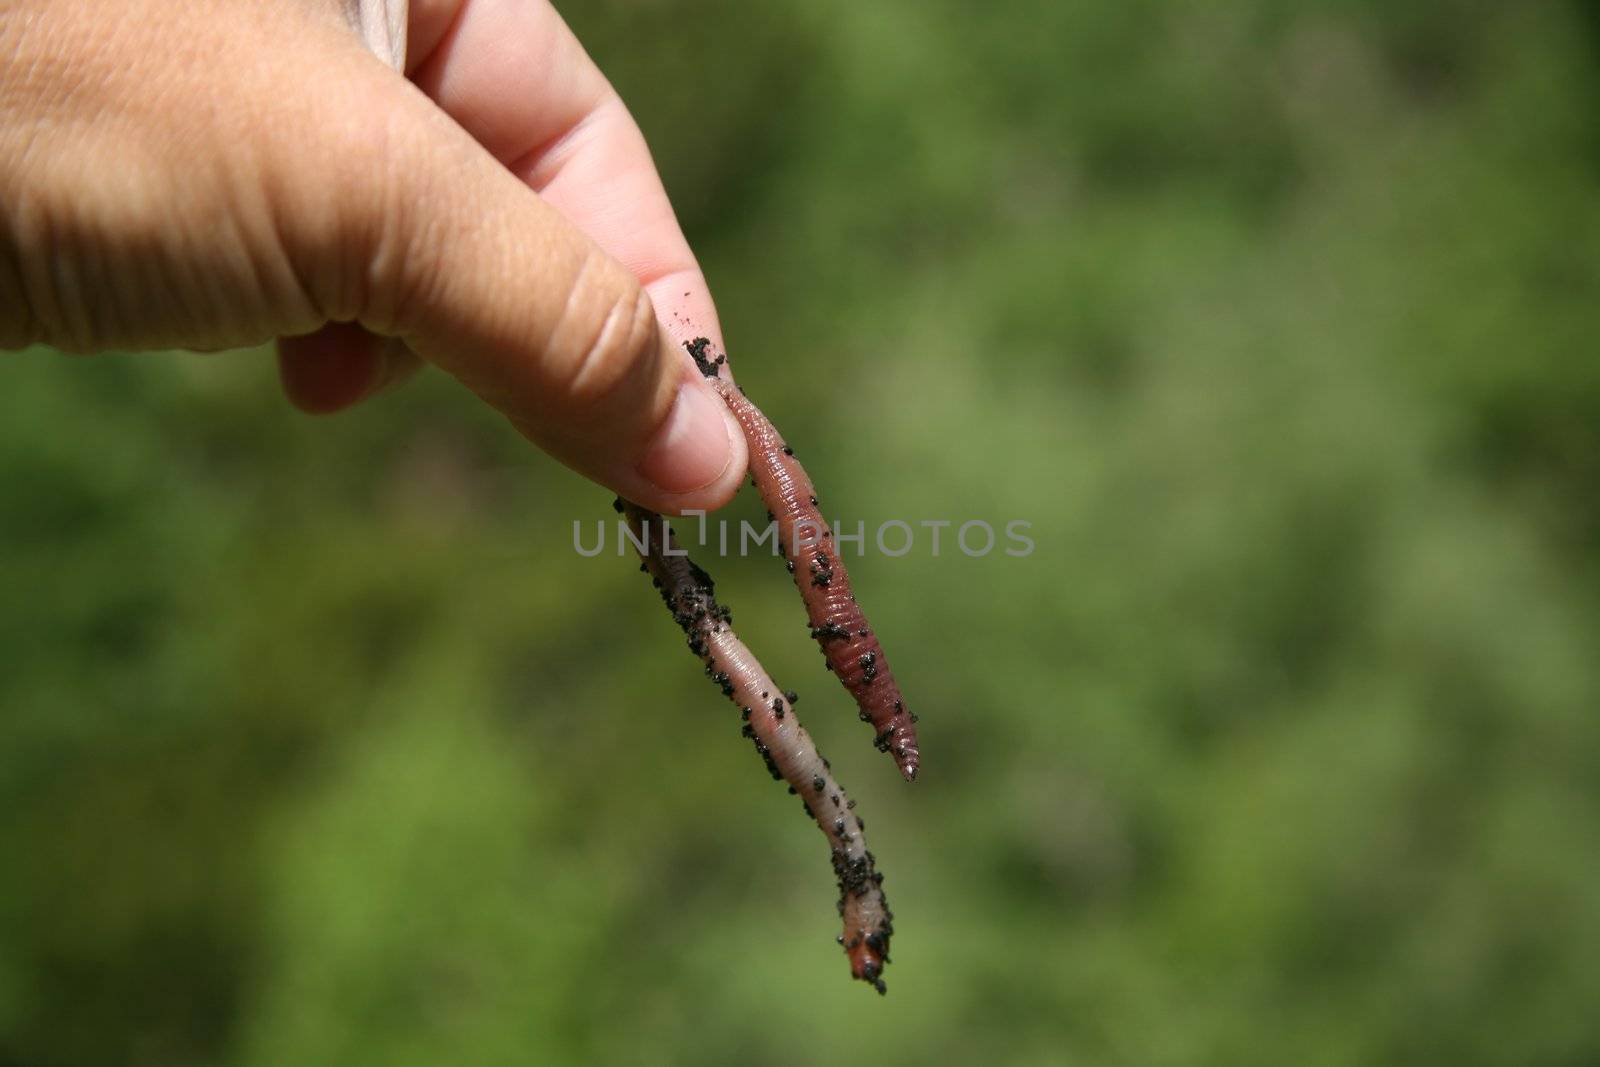 Earthworm isolated and waiting to be used as bait